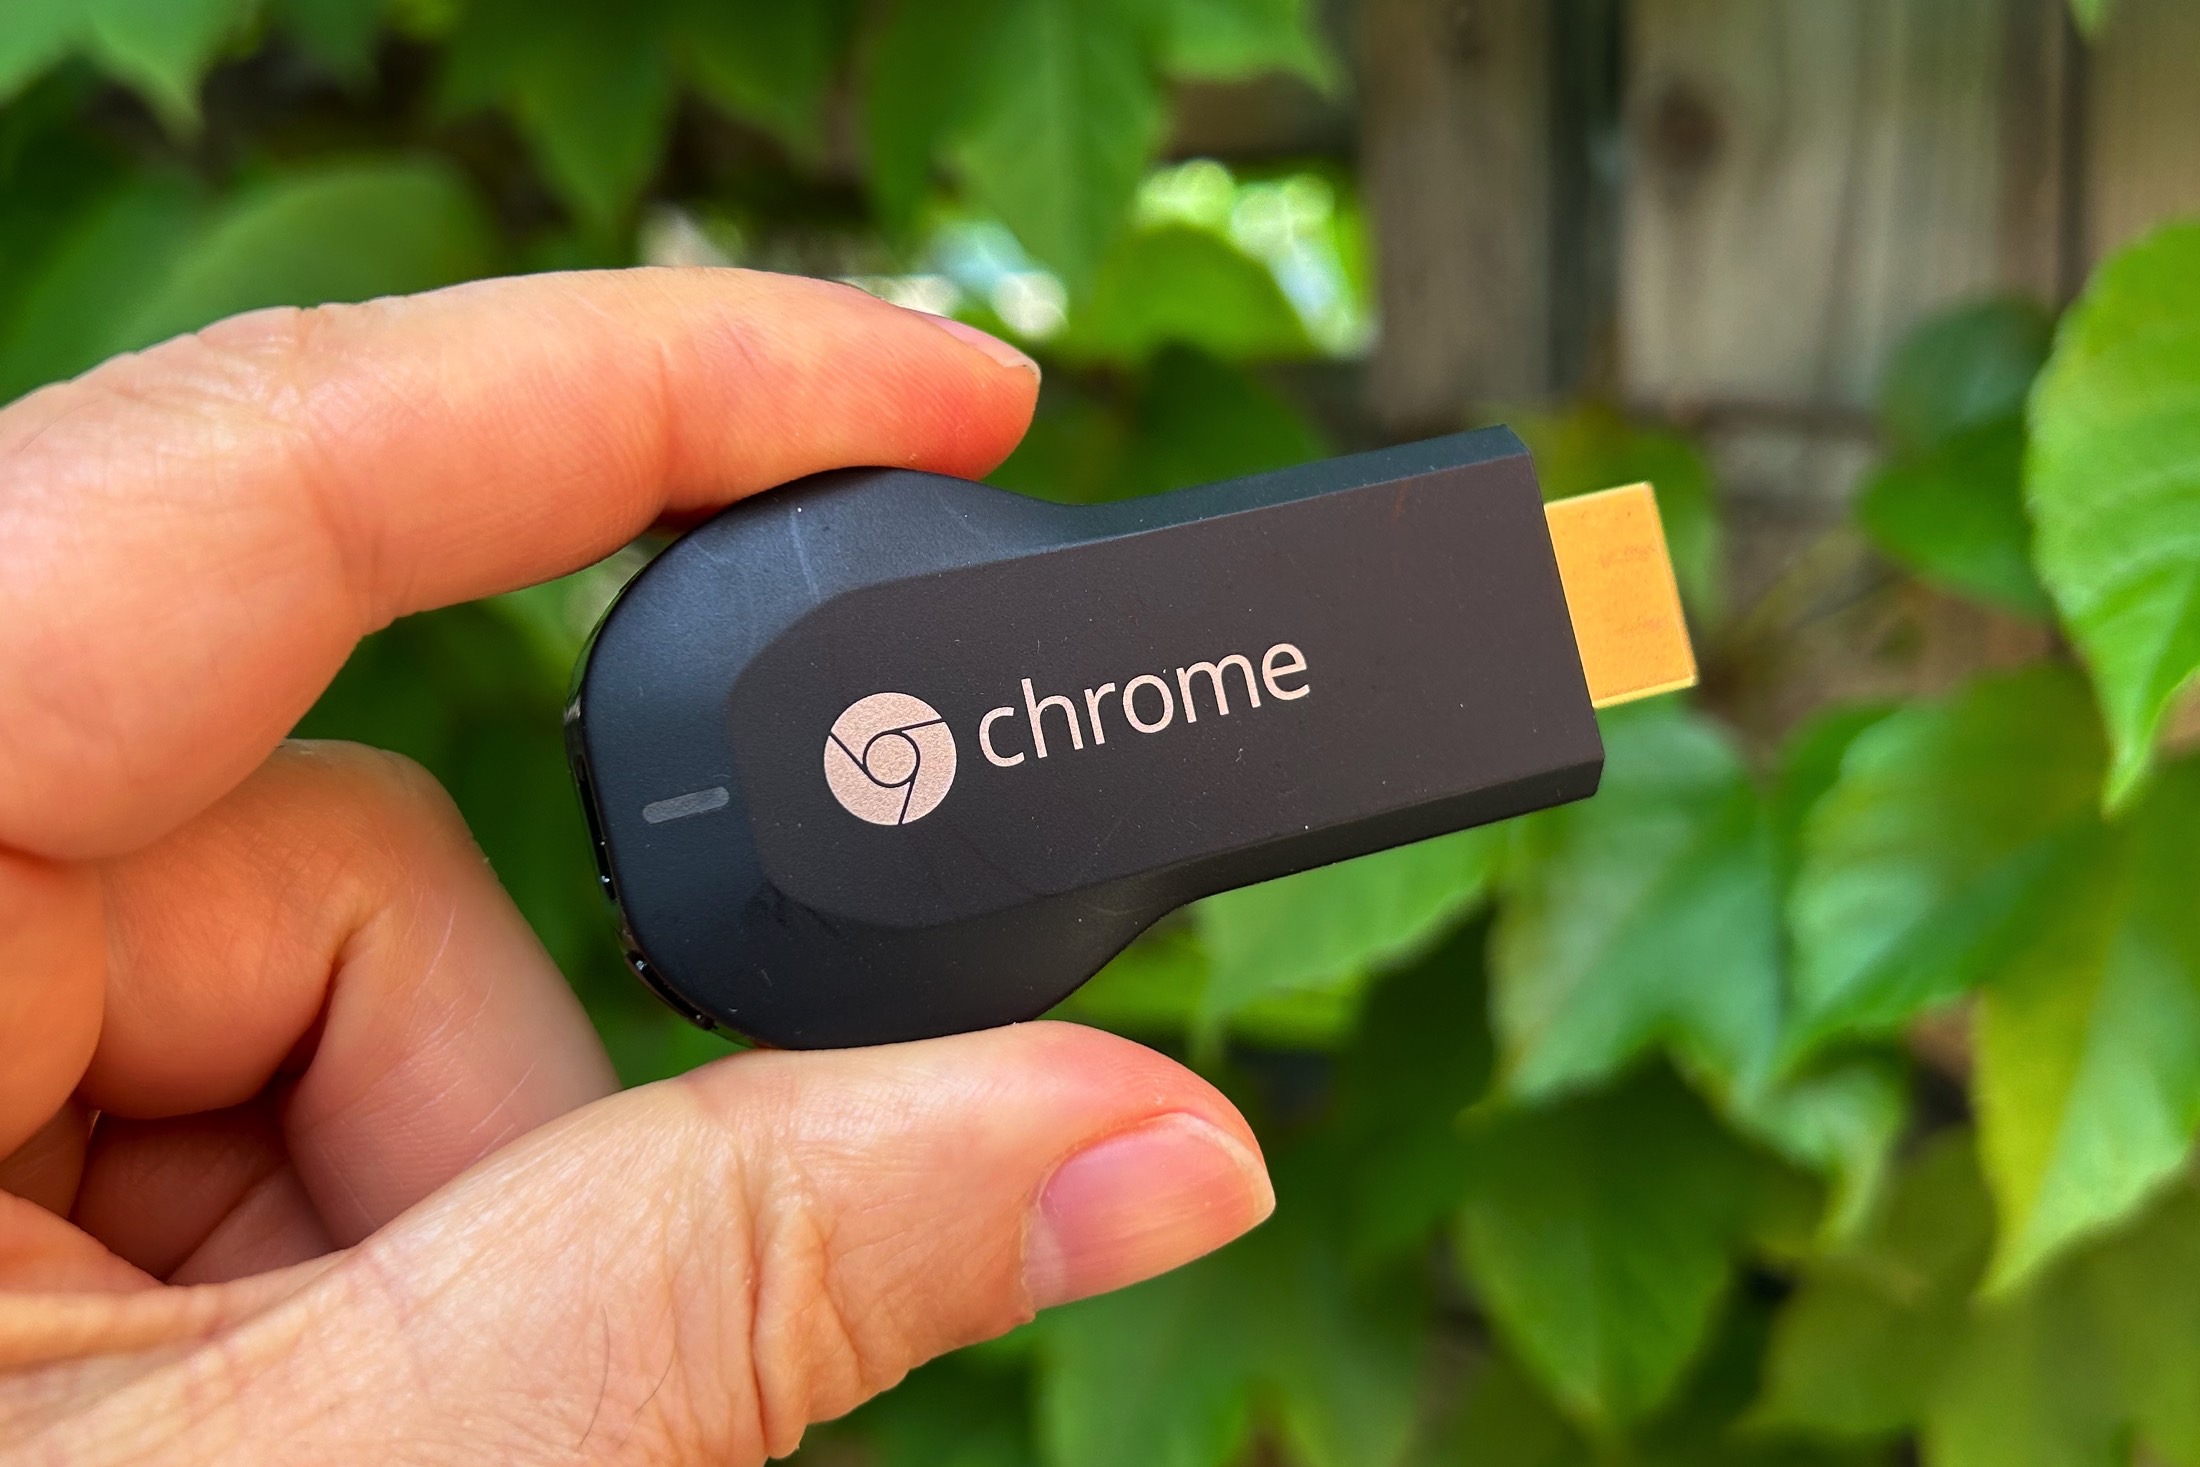 Google Chromecast is getting a huge upgrade – here's what's new